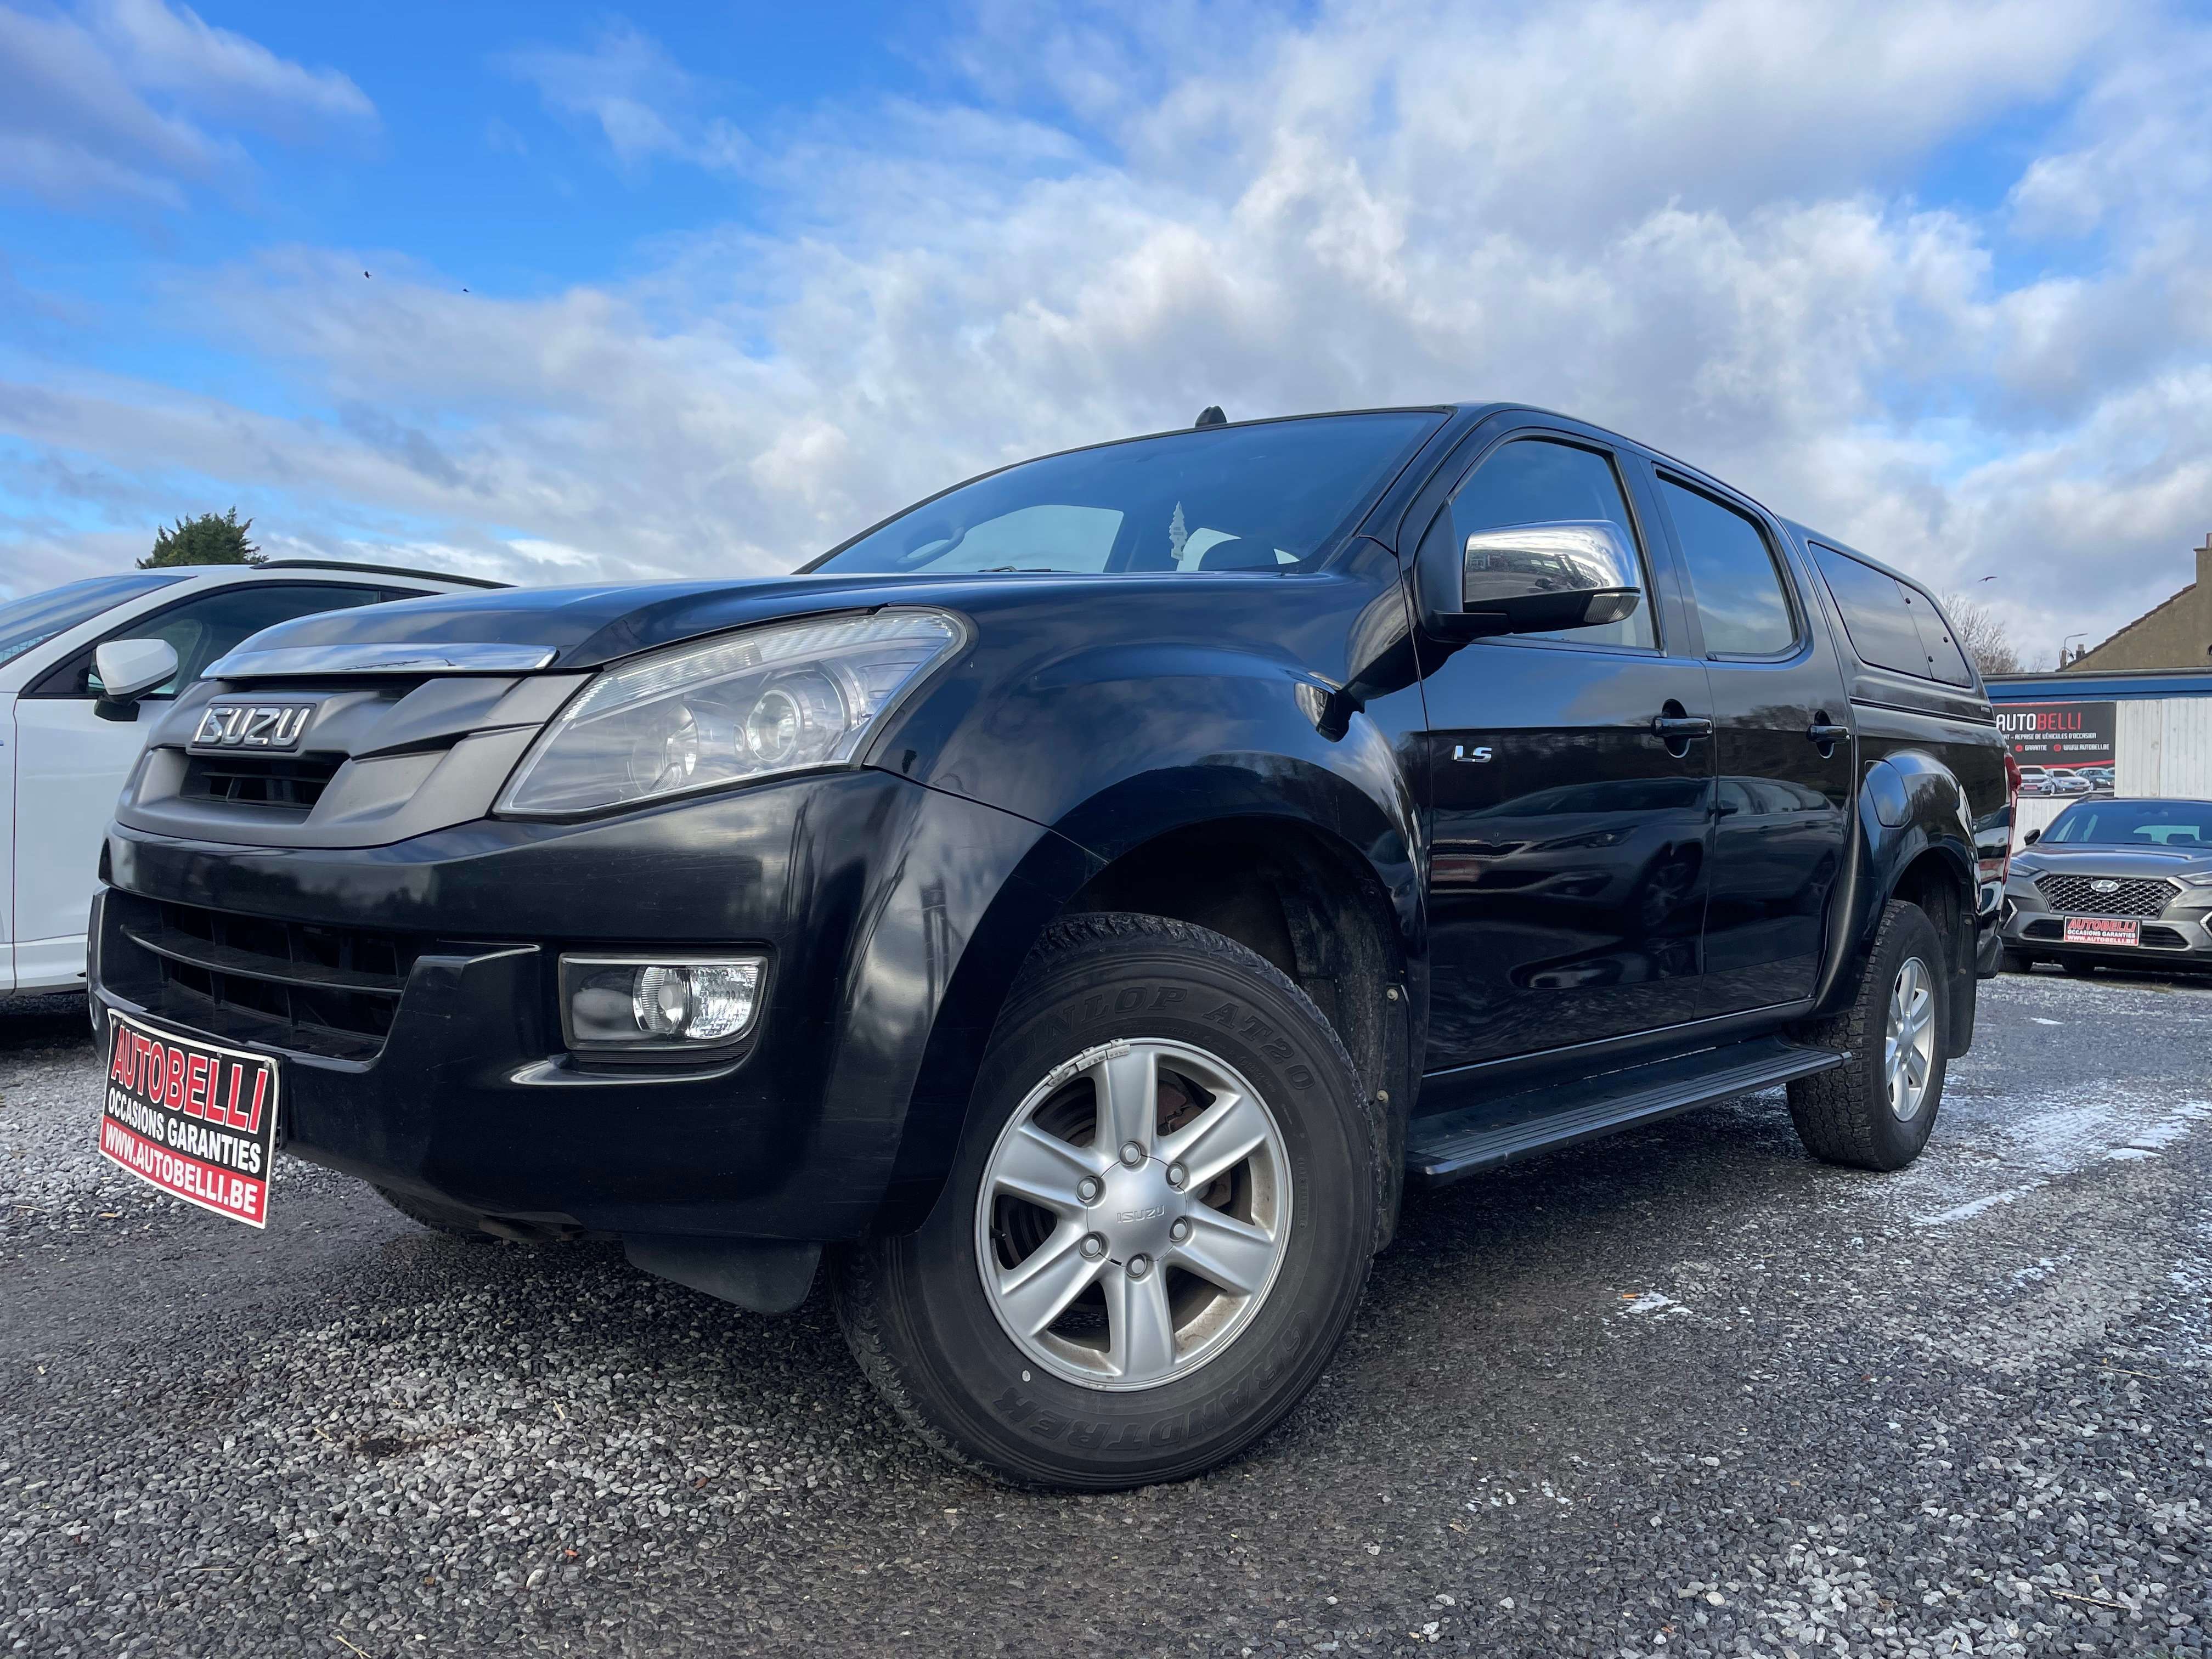 Isuzu D-Max Off-Road/Pick-up in Black used in Wanze for € 14,700.-